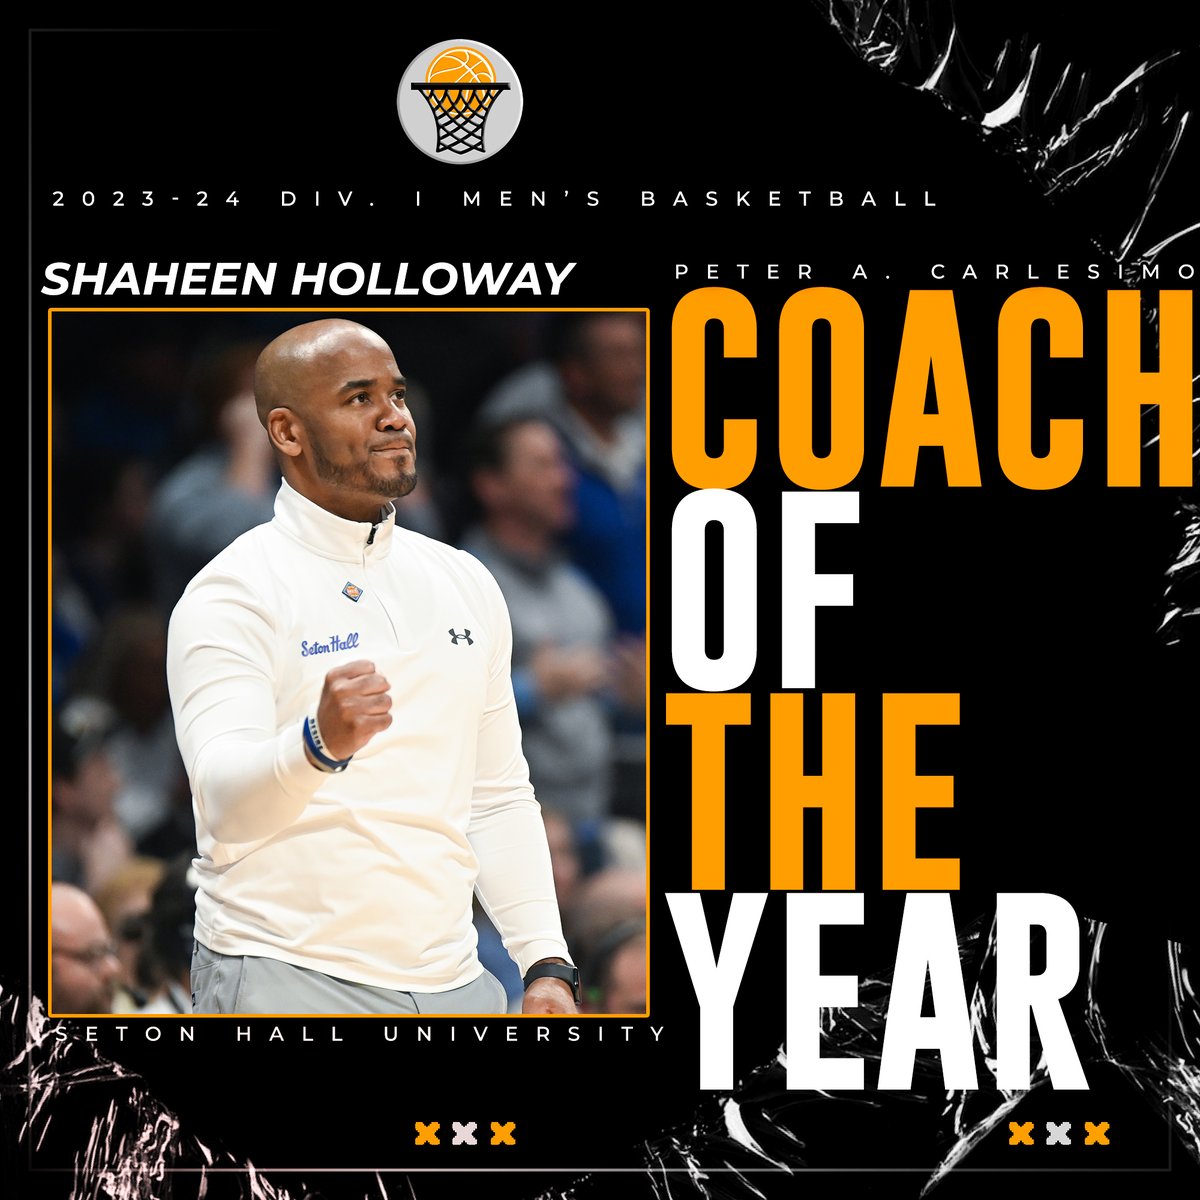 🏀All-Met Div I Peter A. Carlesimo Men's Coach of the Year! Congrats to Shaheen Holloway @SHUAthletics @BIGEAST